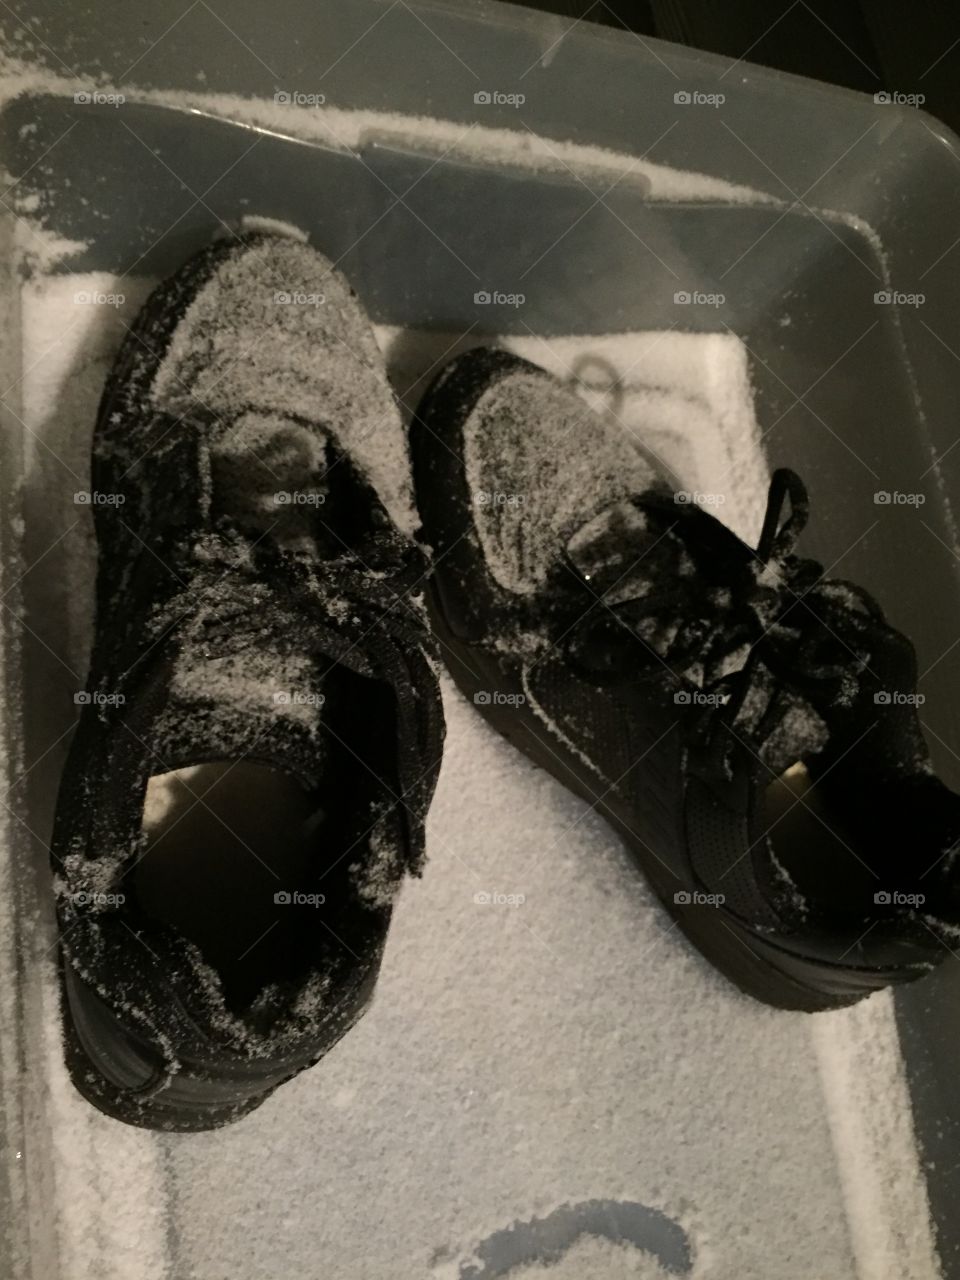 Snow on shoes